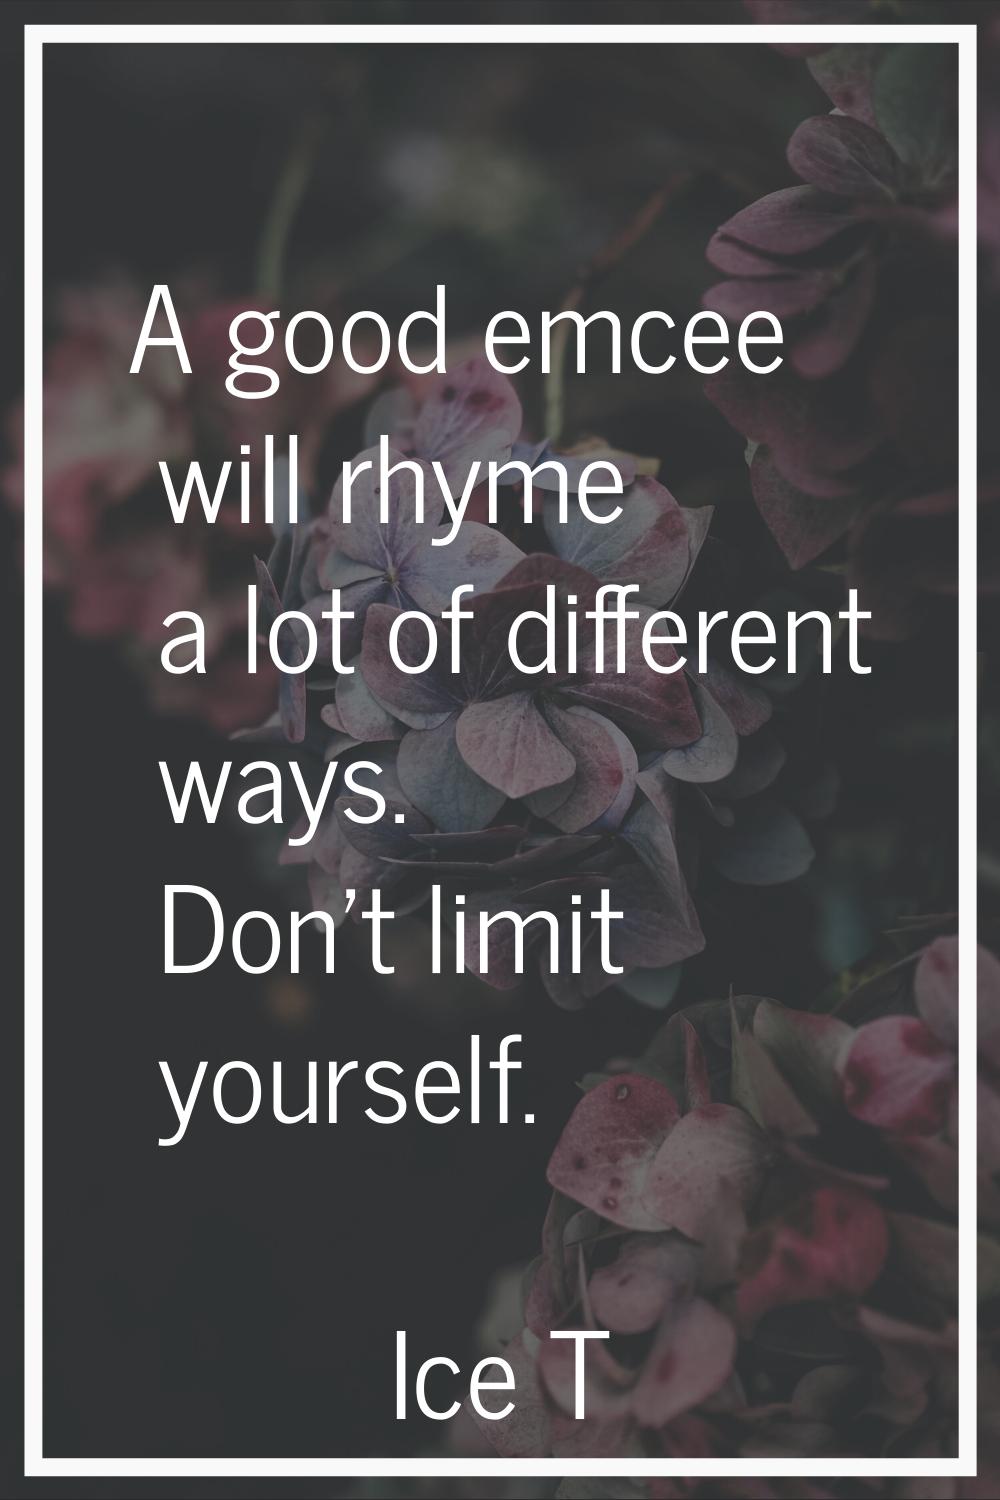 A good emcee will rhyme a lot of different ways. Don't limit yourself.